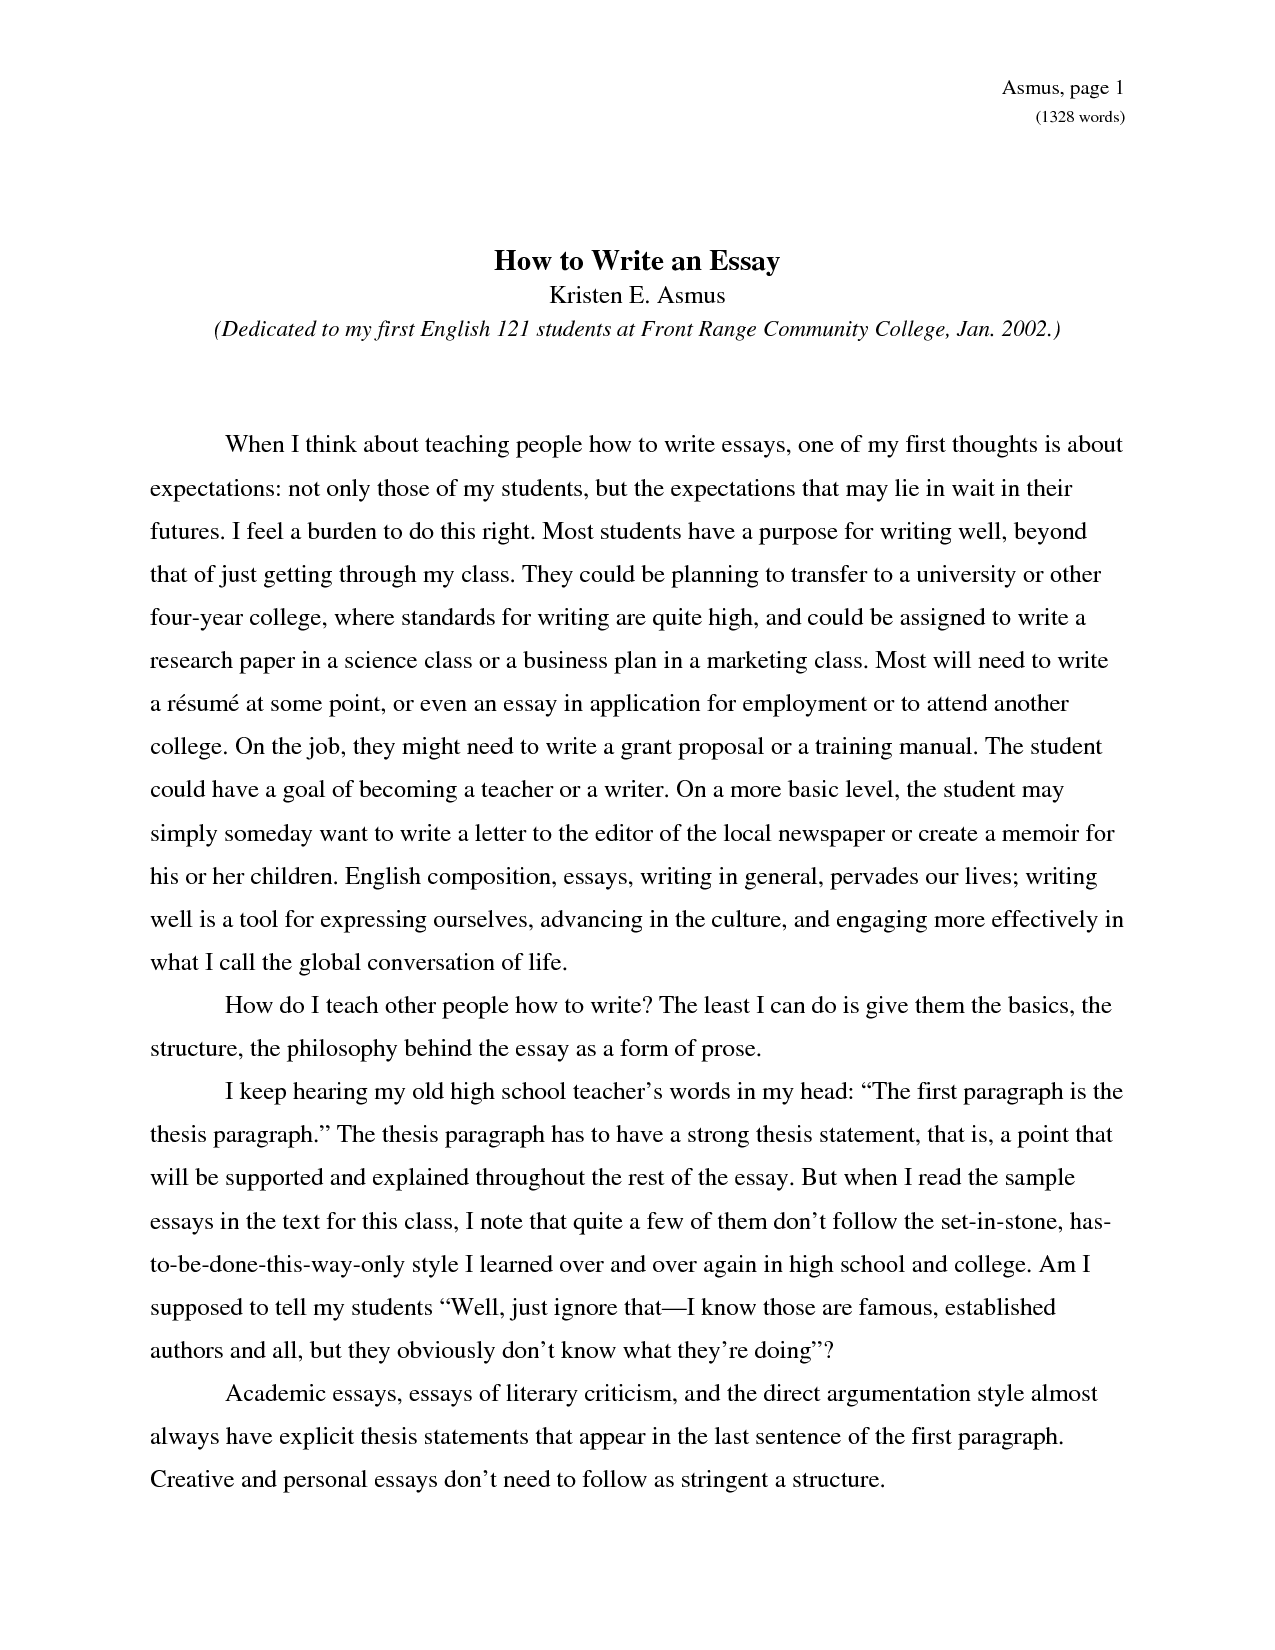 How to Stay on Topic When Writing an Essay